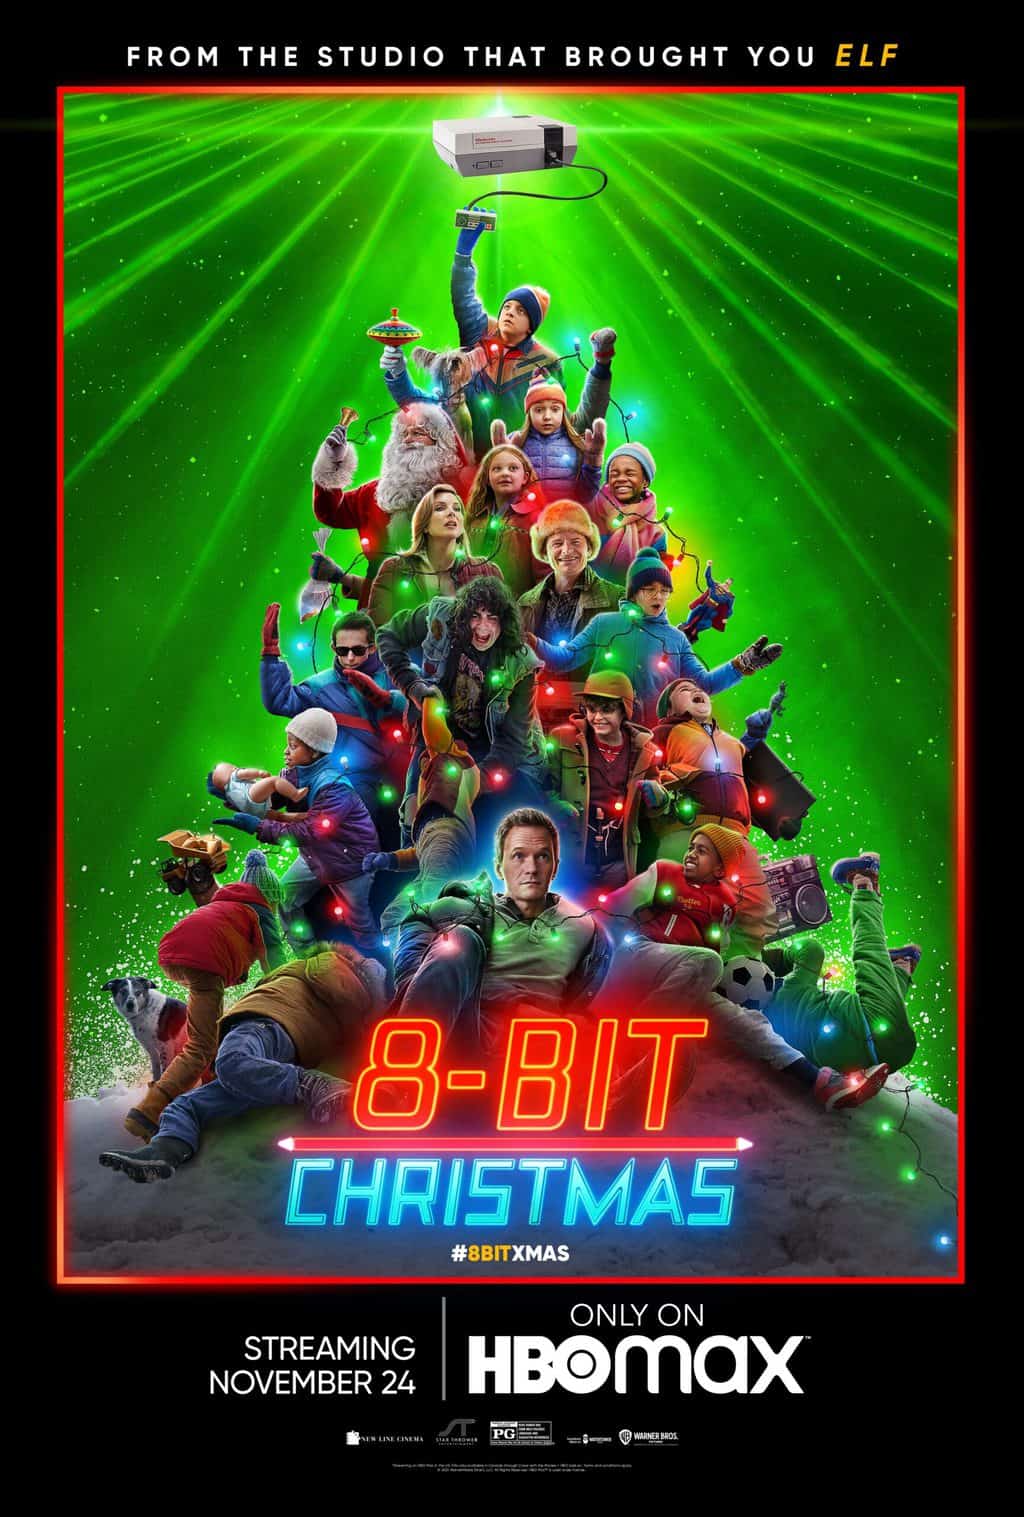 Is it ok for kids? 8 bit christmas movie poster